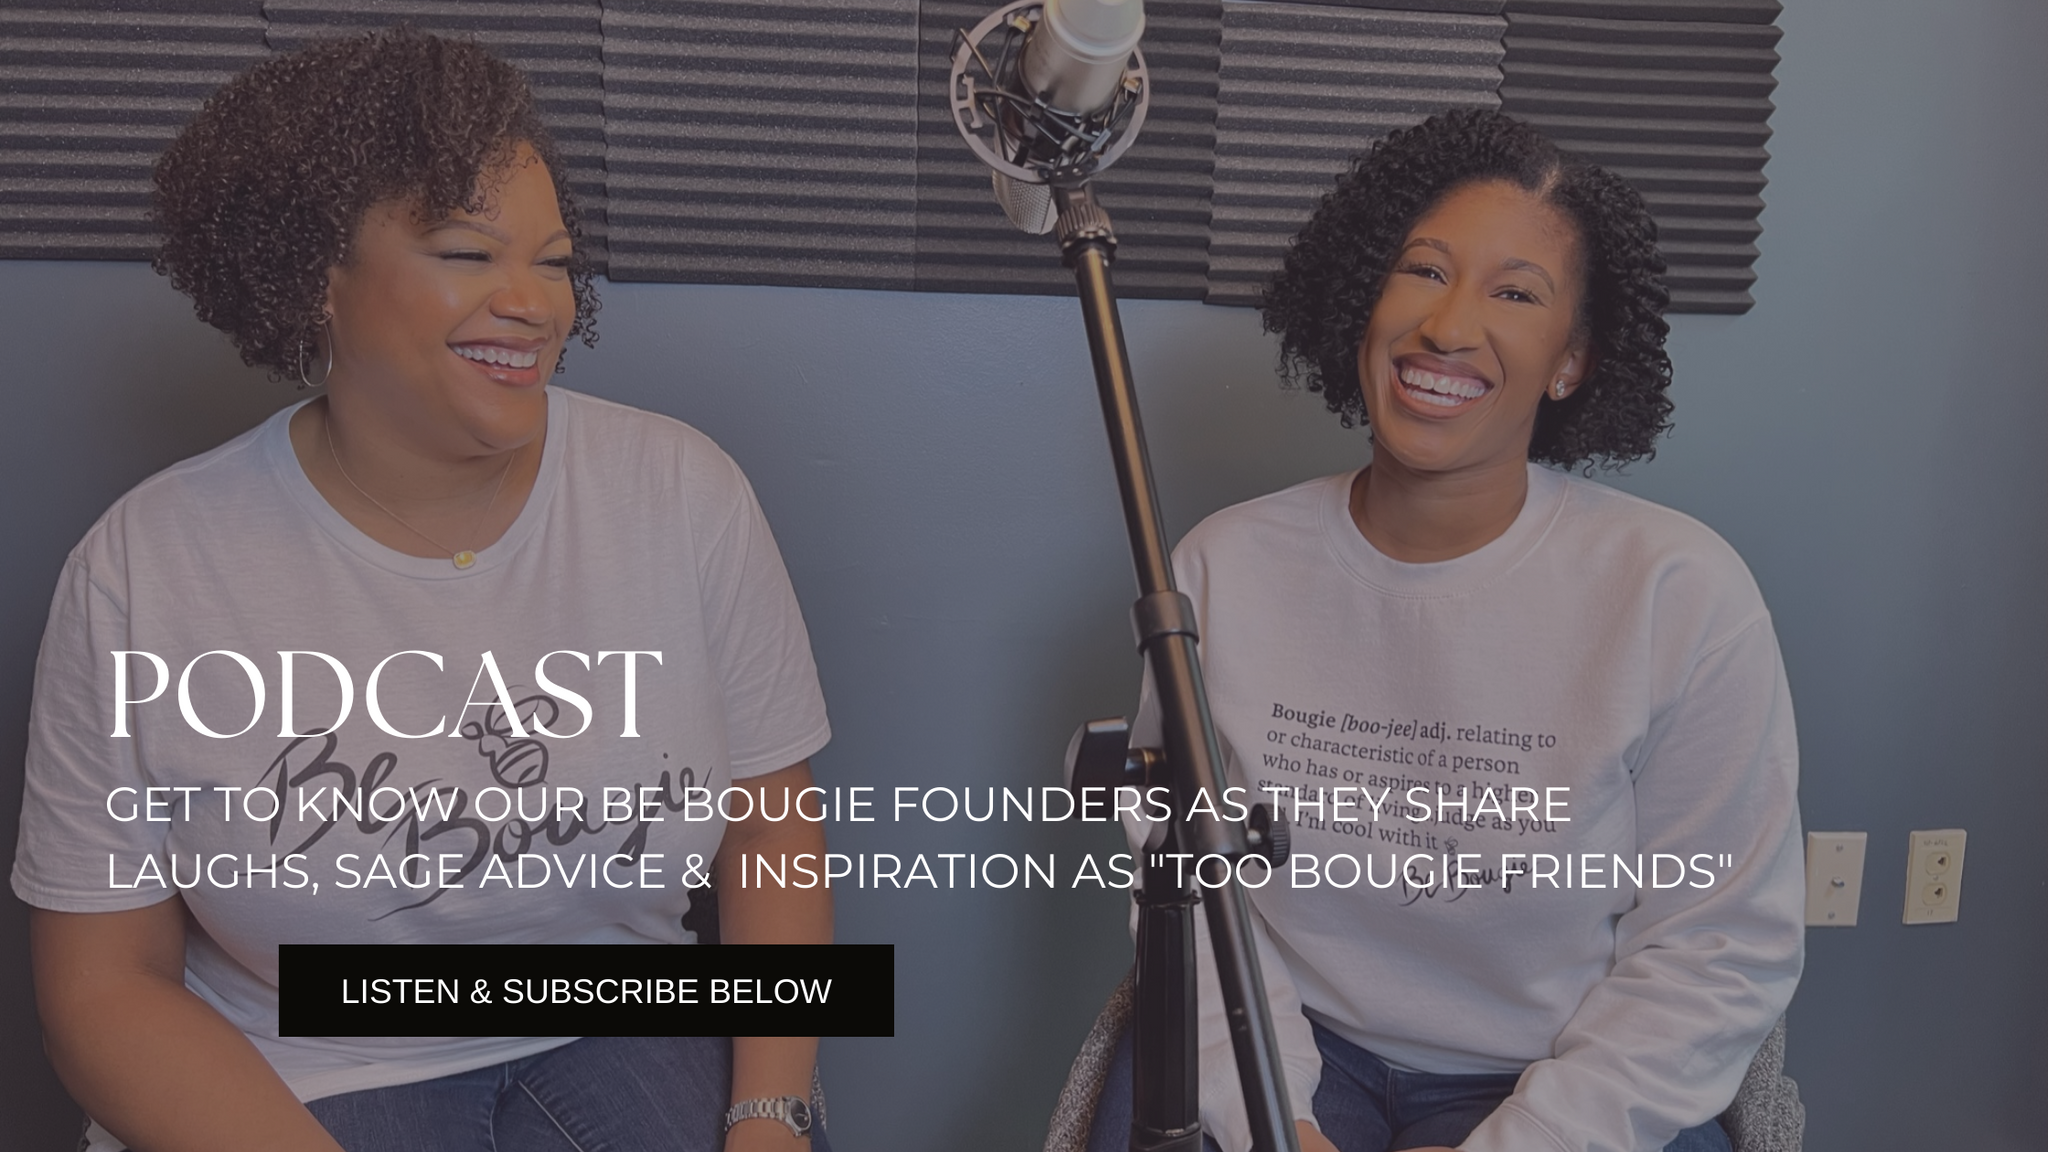 TOO BOUGIE FRIENDS PODCAST IMAGE LISTEN AND SUBSCRIBE TO THE PODCAST WITH THE BE BOUGIE CO-FOUNDERS